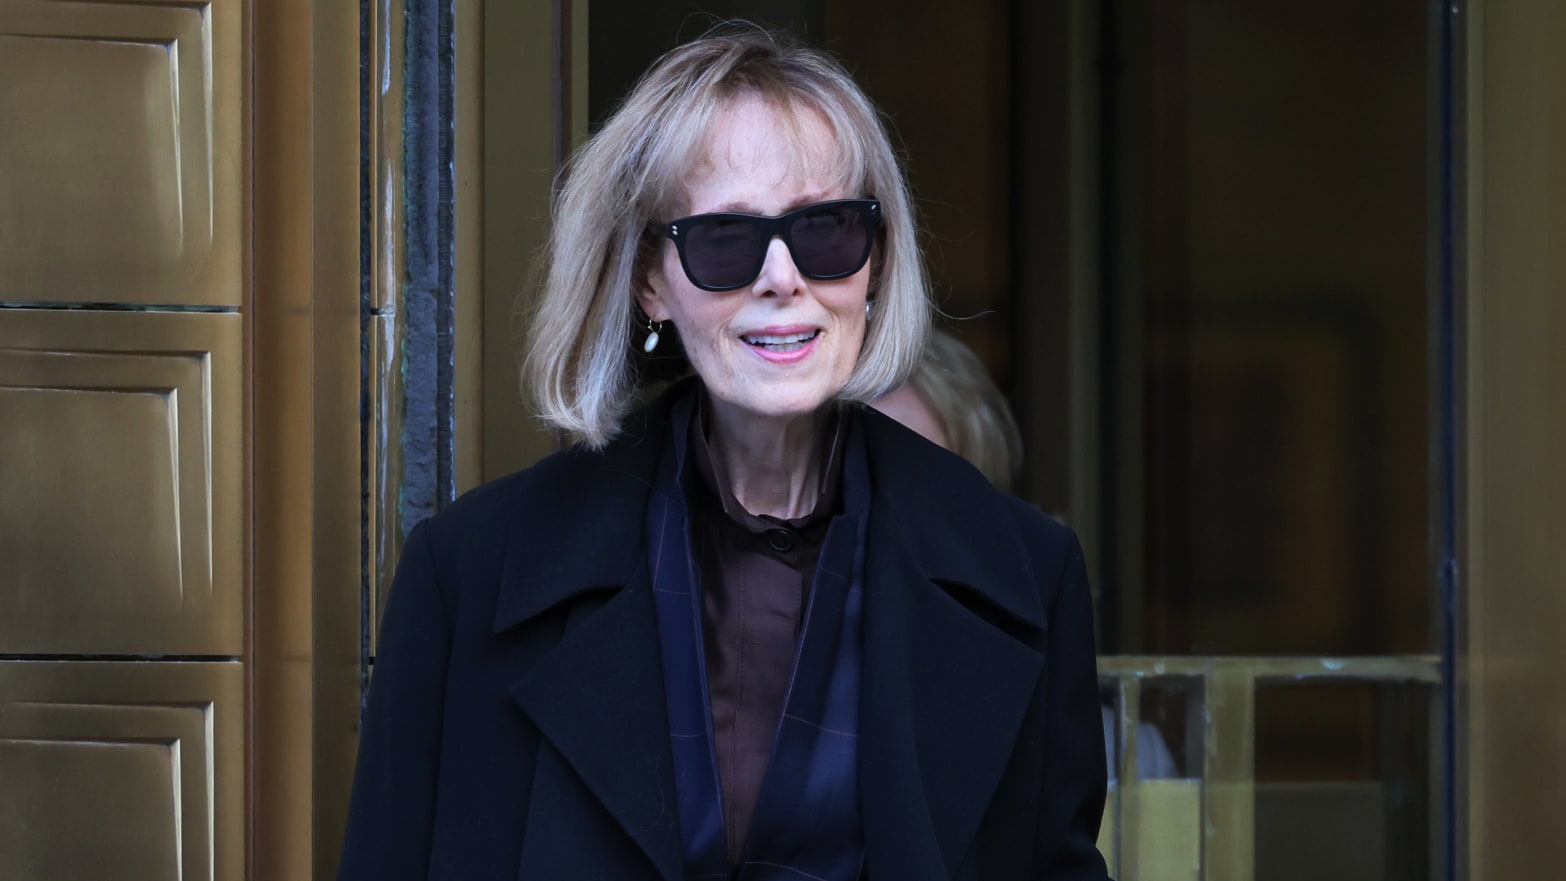 Magazine Columnist E. Jean Carroll leaves after her civil trial against former President Donald Trump at Manhattan Federal Court